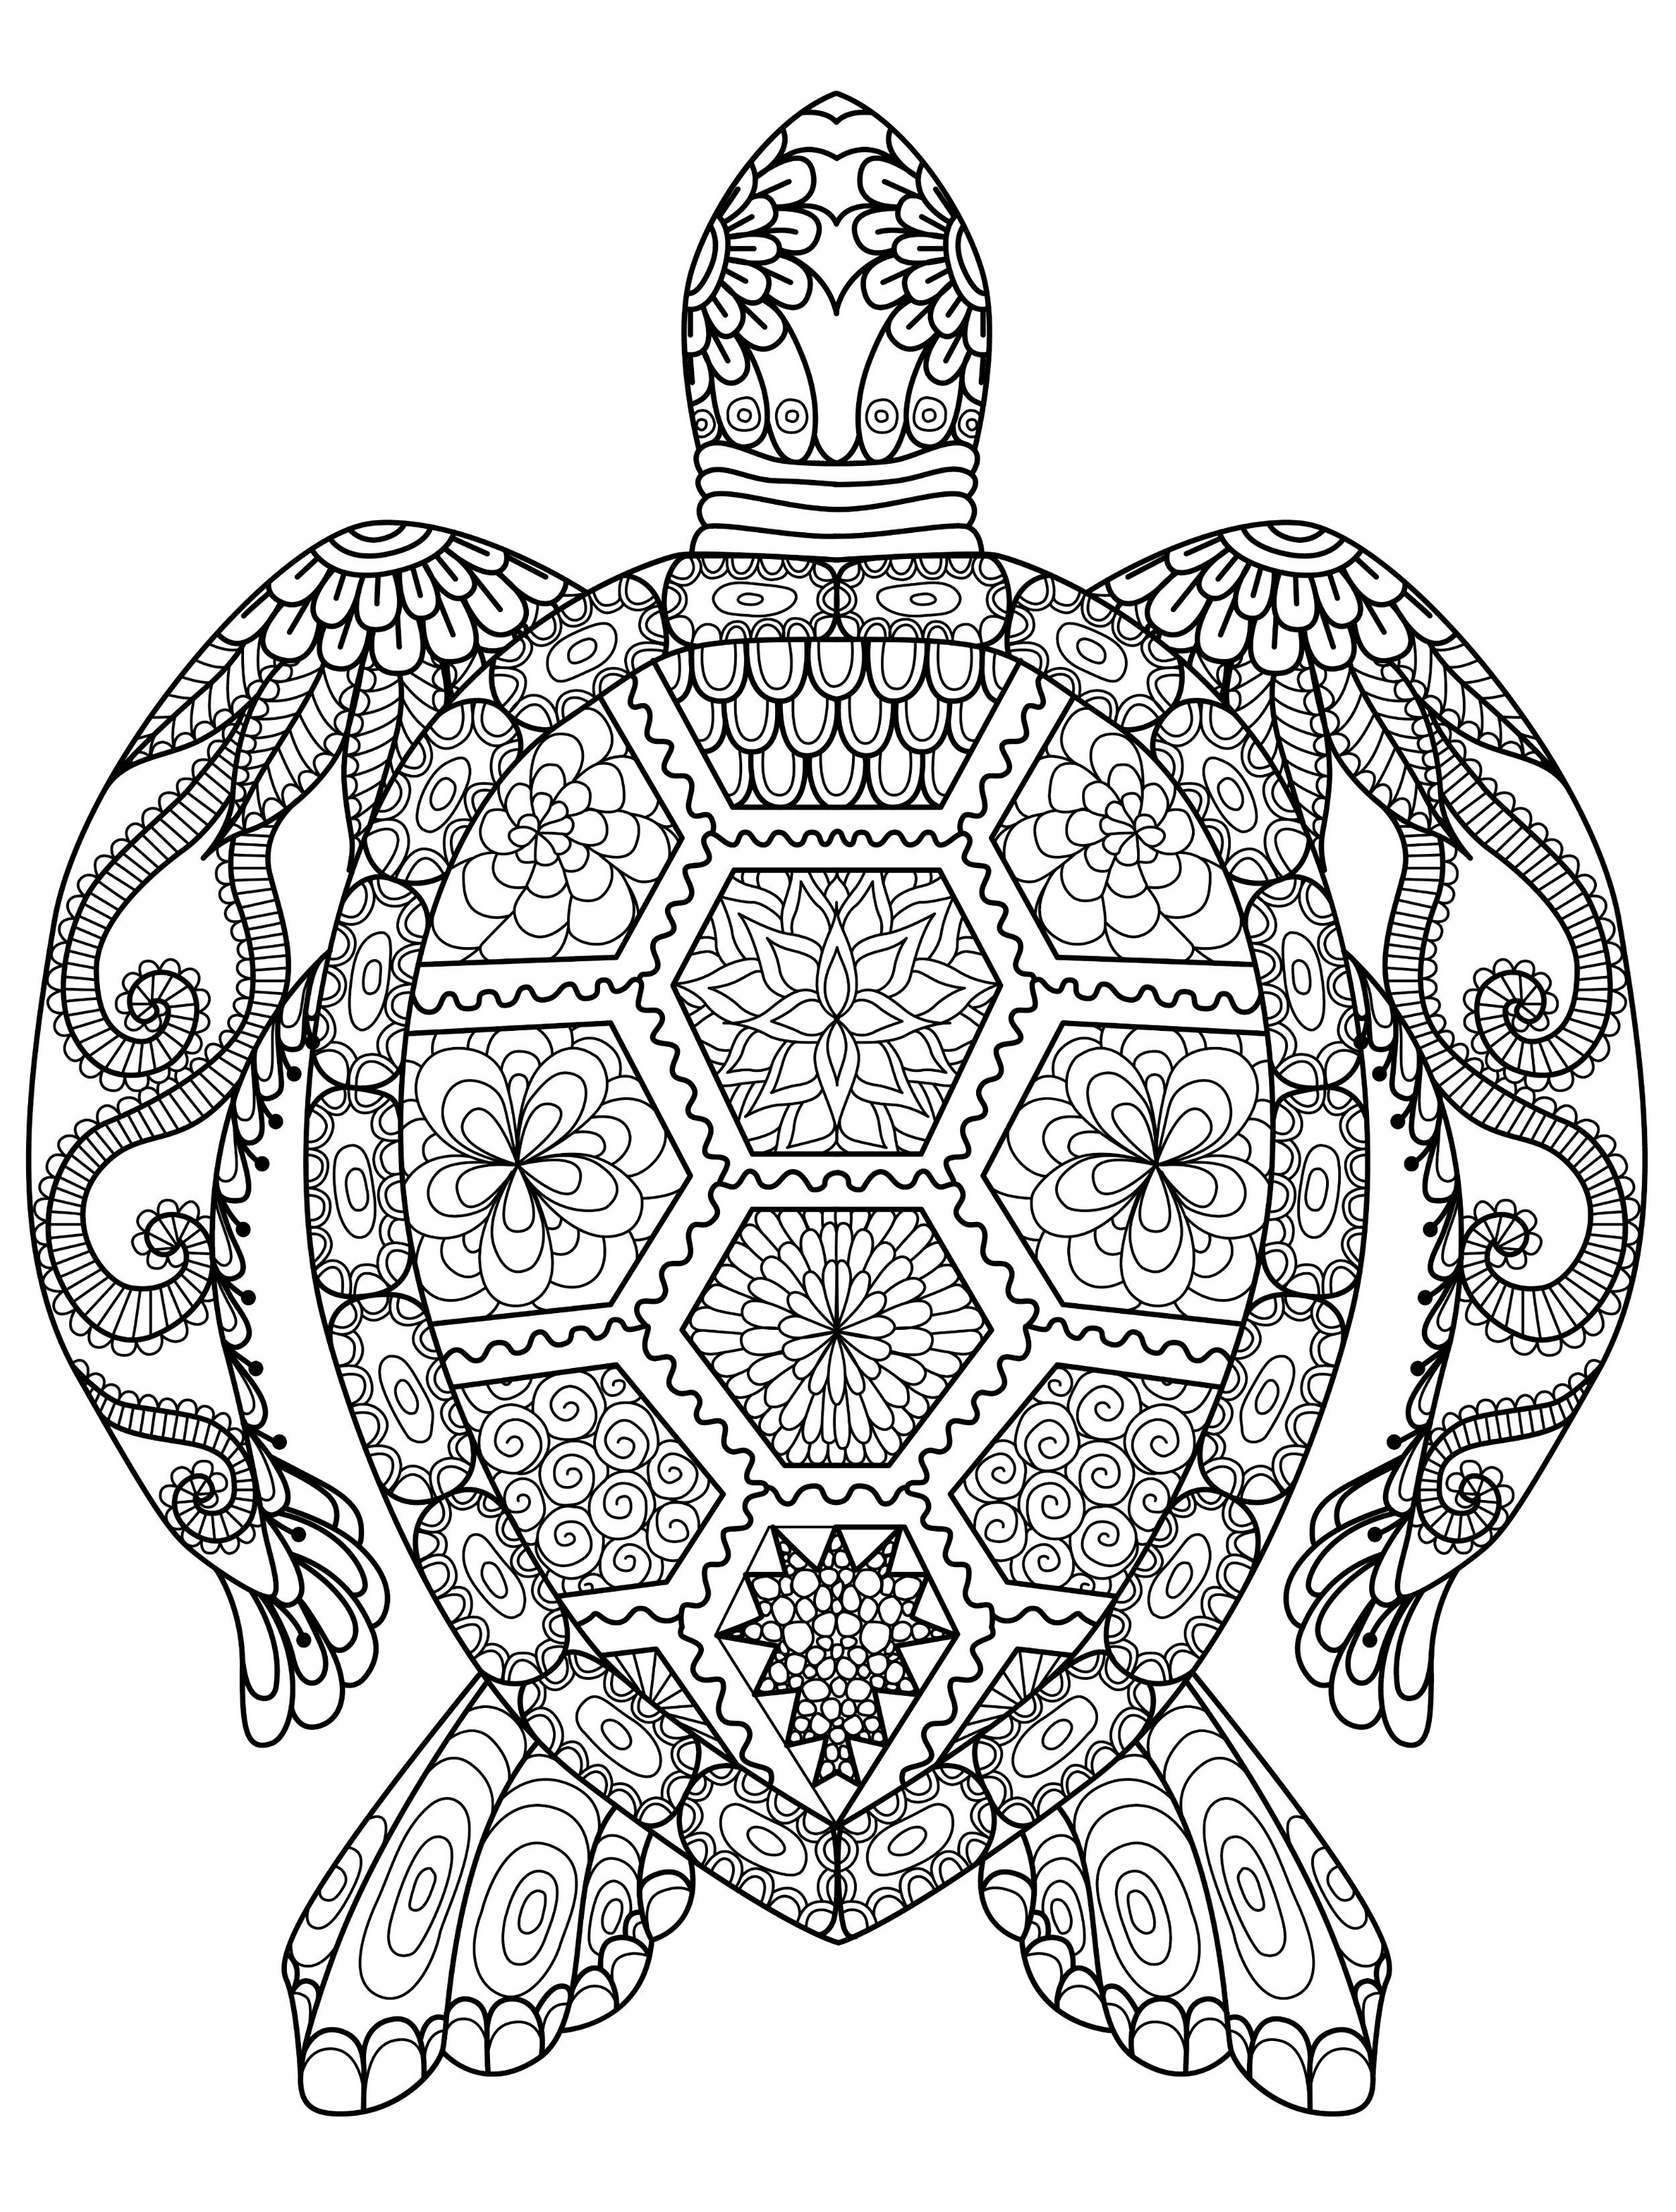 Adult Coloring Sheet
 Adult Coloring Pages Animals Best Coloring Pages For Kids